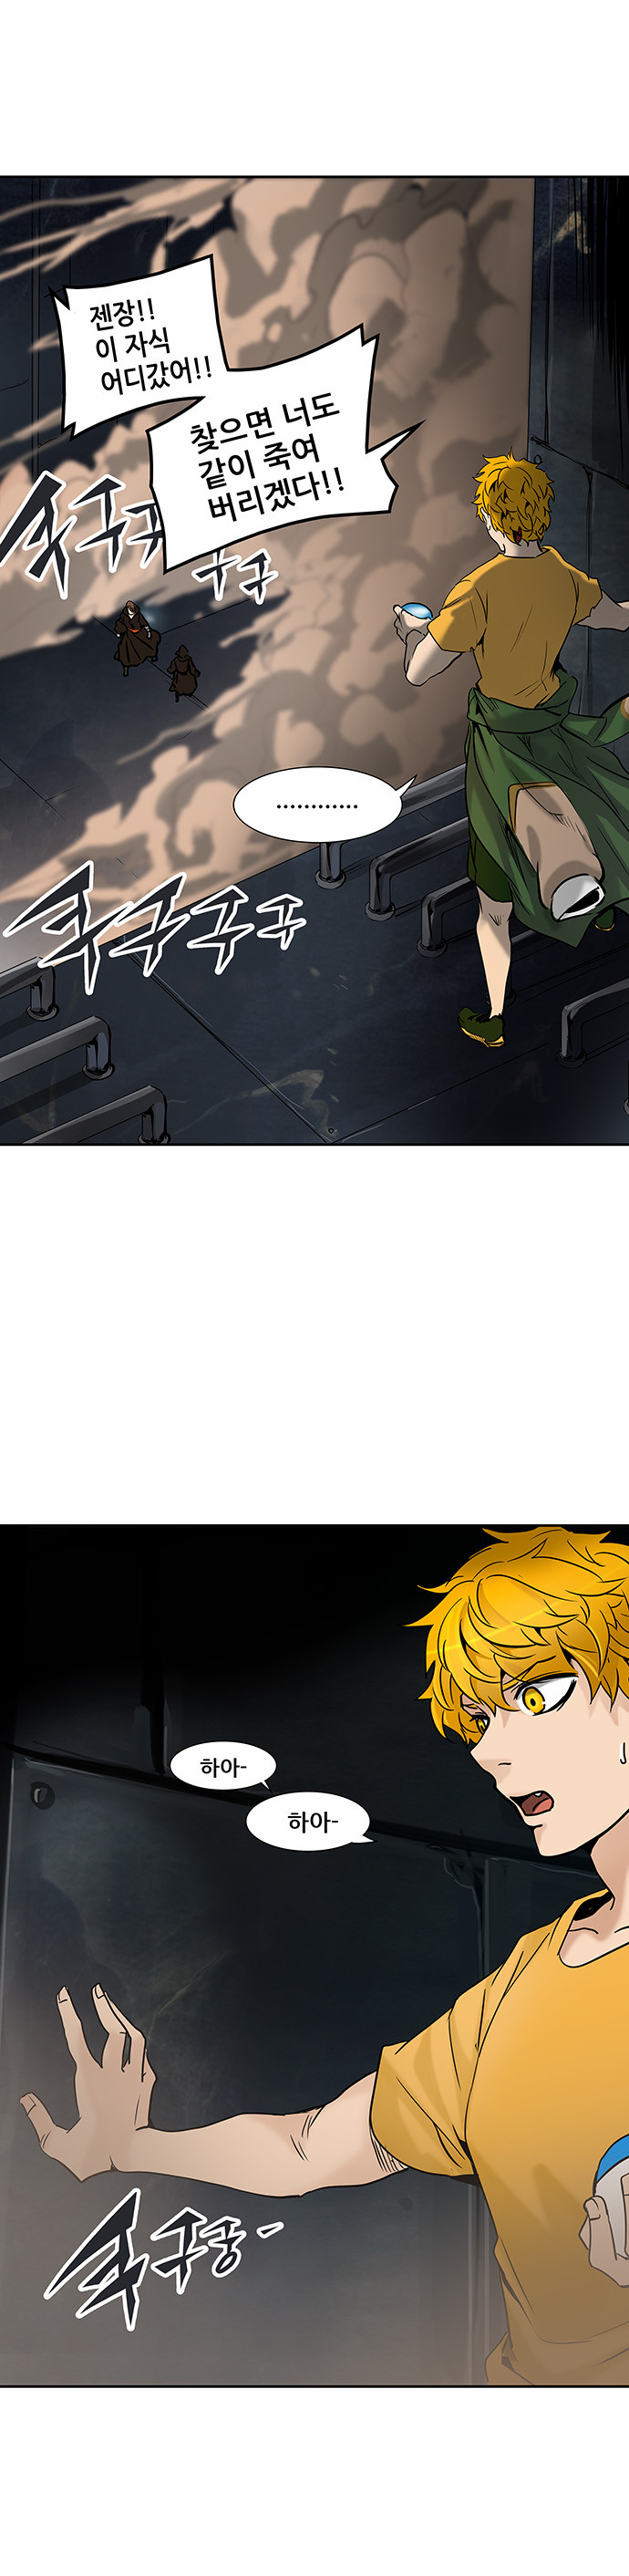 Tower of God - Chapter 308 - Page 1